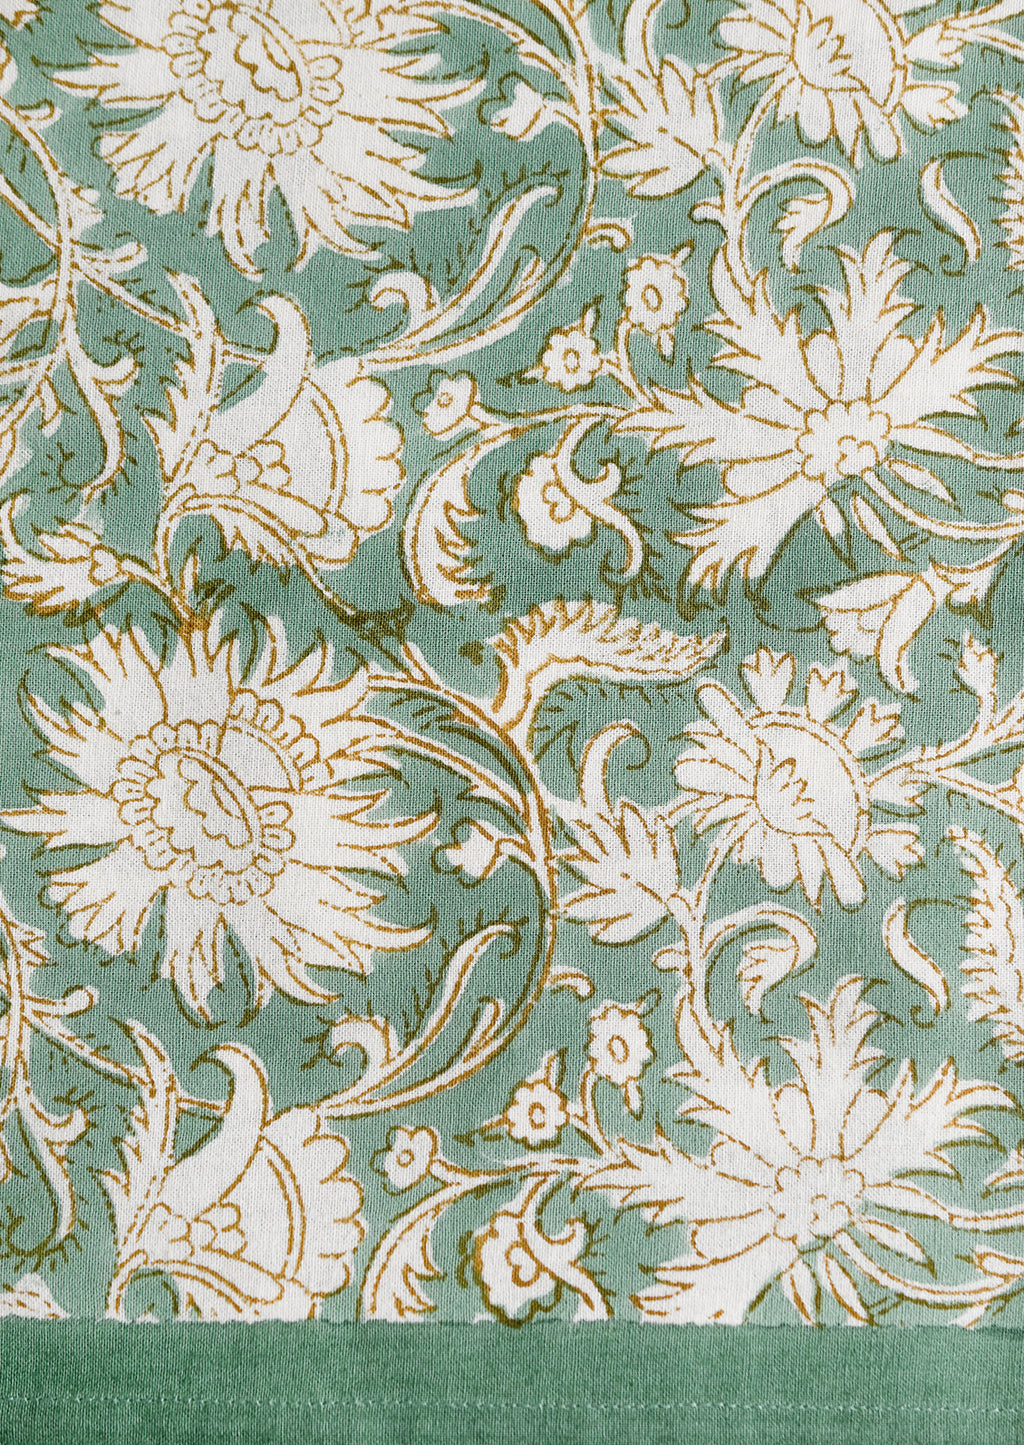 4: A block print tablecloth in sea green with white and brown floral print.